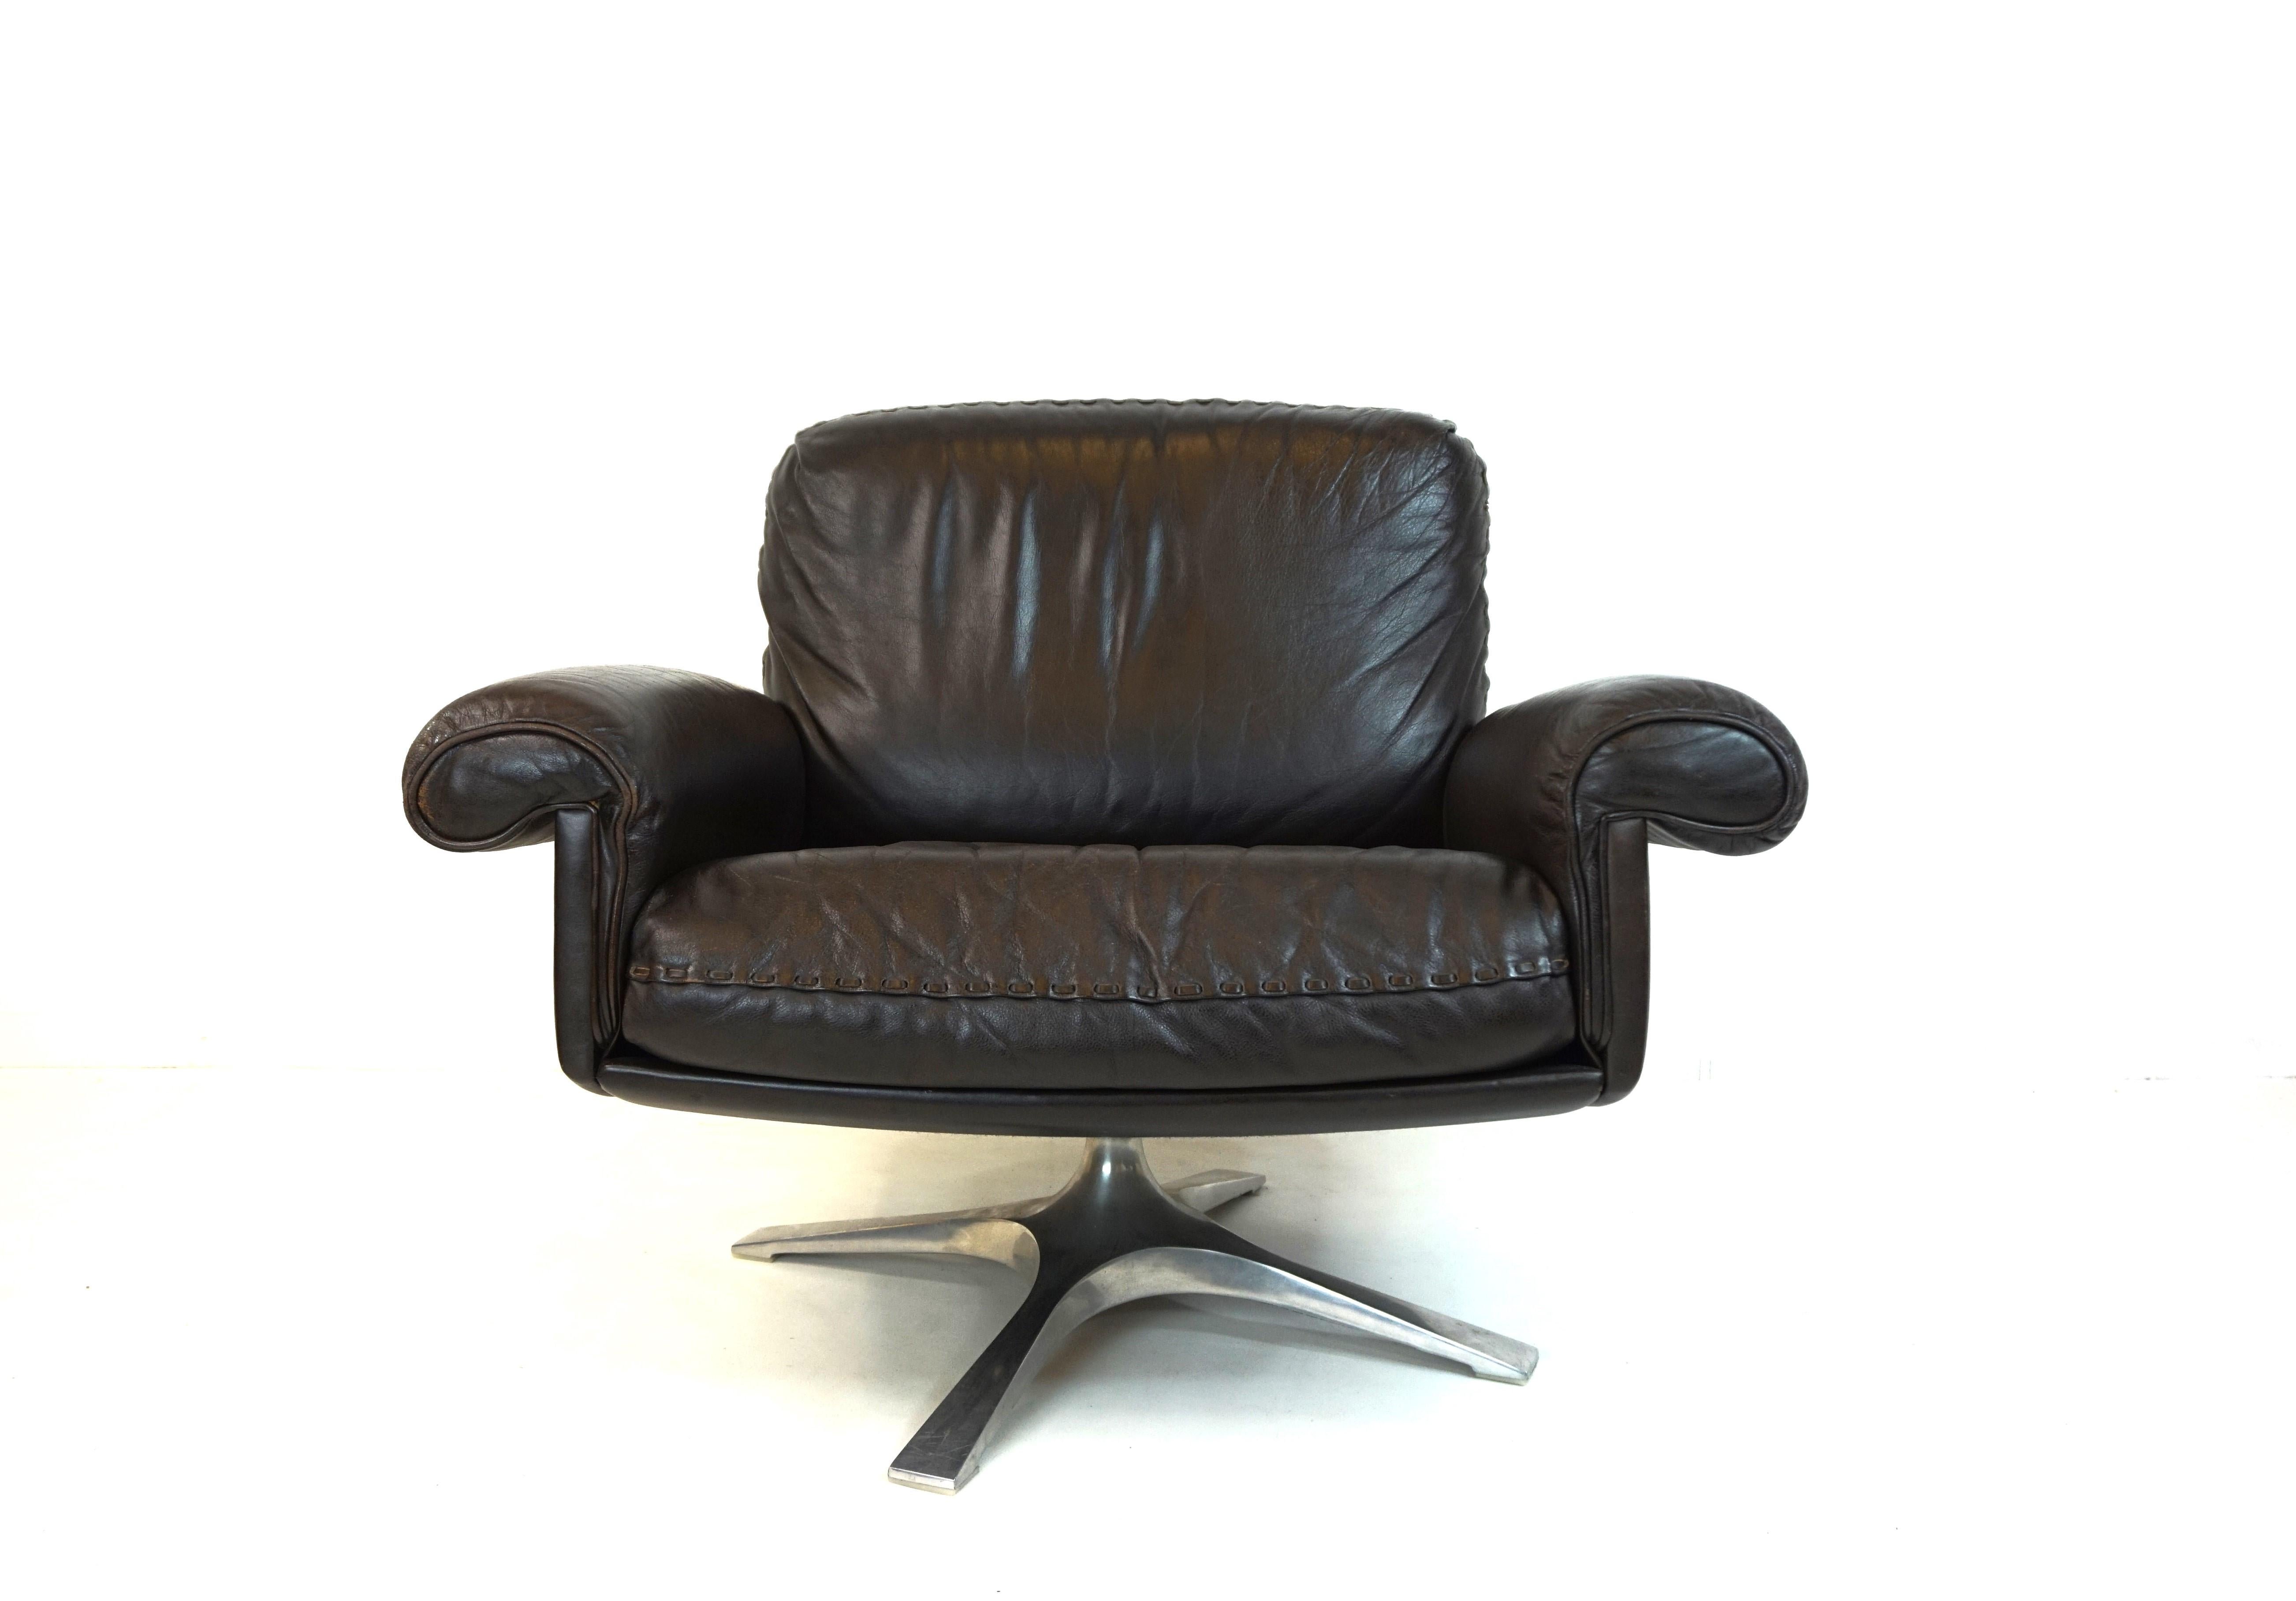 This De Sede DS 31 leather armchair with a short backrest makes an excellent impression. The armchair's dark brown leather is in very good condition, the strap stitching is intact and the seat shows minimal patina. The armrests are, especially in